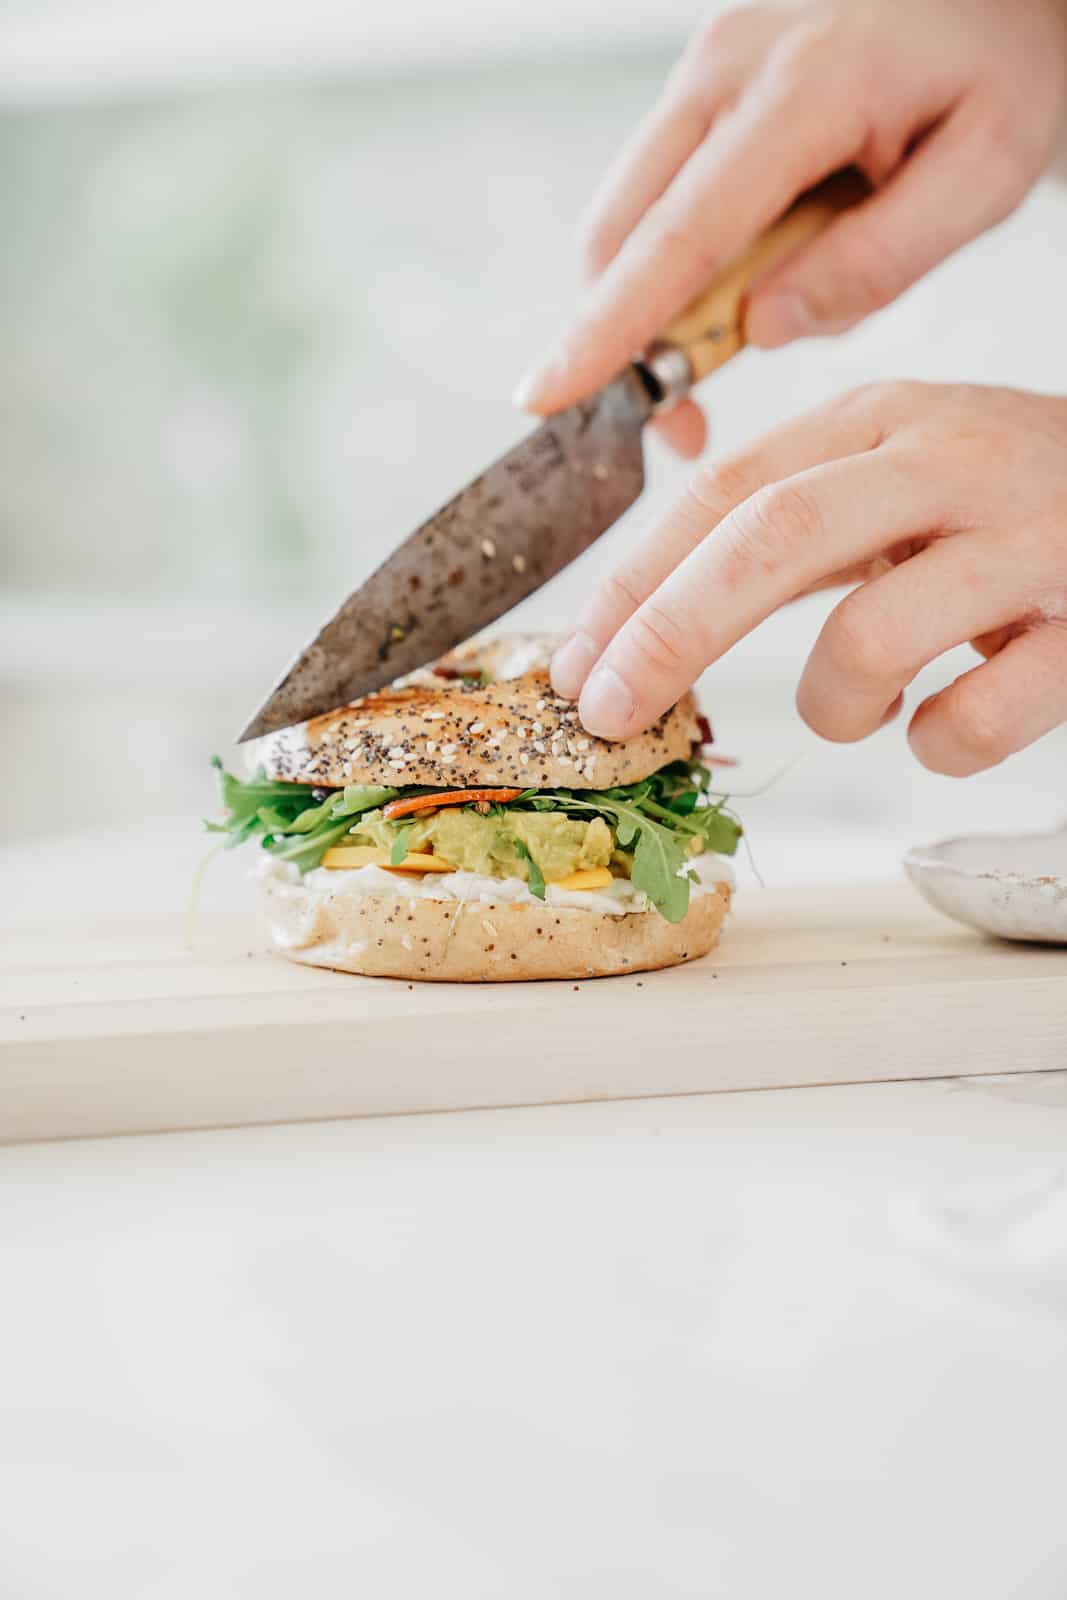 Yummy loaded vegan everything bagel sandwich being cut by a knife for serving.